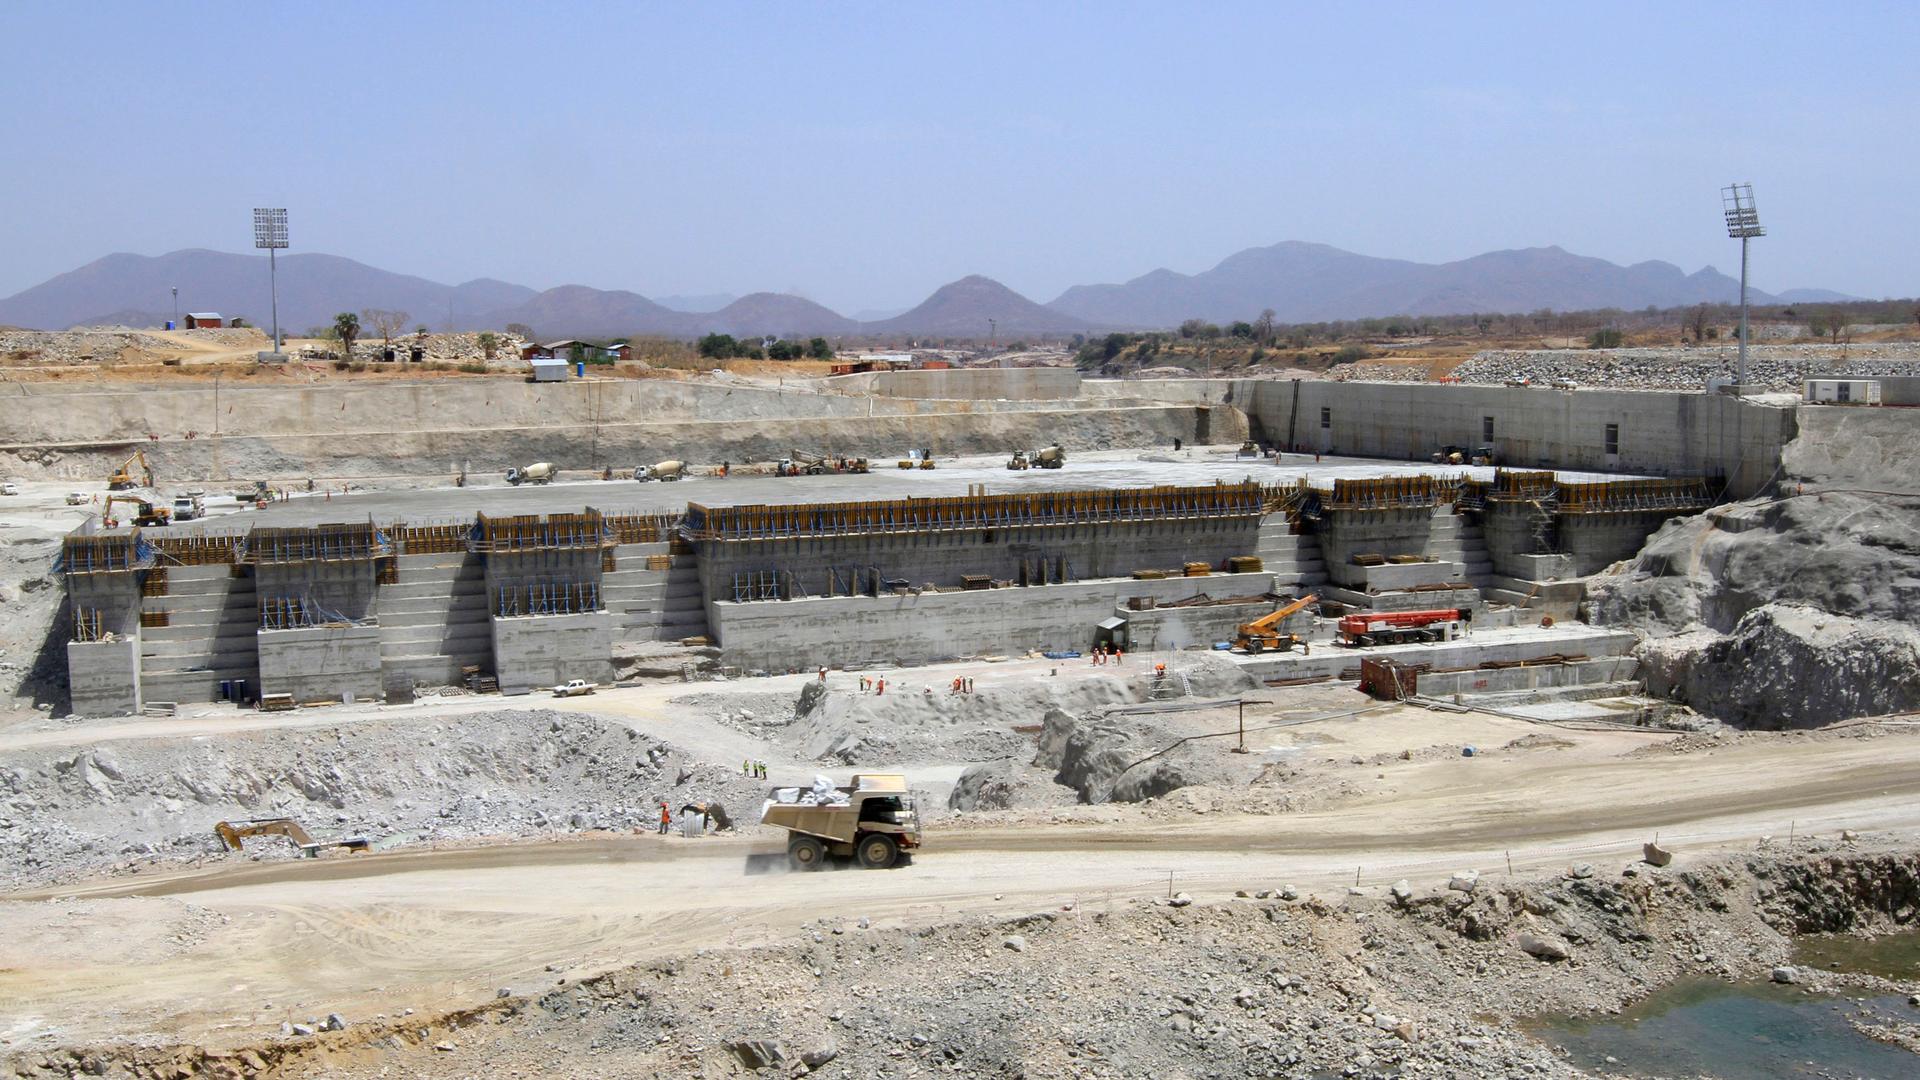 Ethiopia's Grand Renaissance dam on the Blue Nile, shown under construction in March of 2014. Egypt claims most of the water in the 4,000 mile-long river that it shares with 10 other countries, and fears the $4.7 billion Renaissance dam will reduce the wa